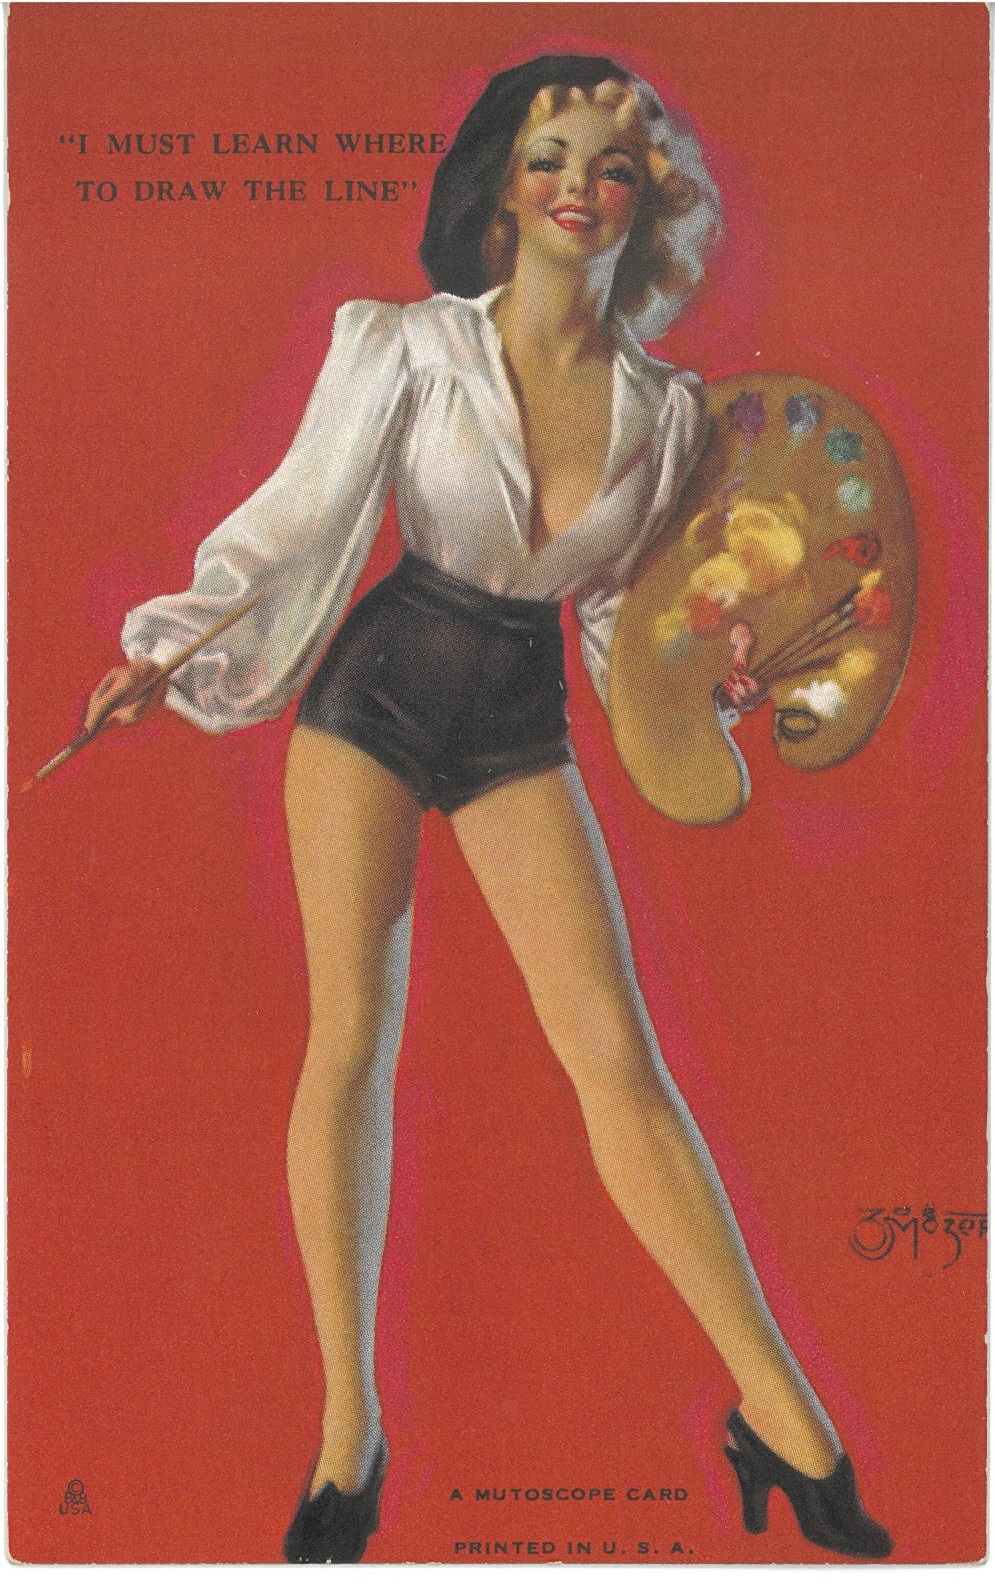 Painting of a blonde woman against a blank red background. The woman wears tight black shorts, a low-cut white blouse, and a beret and is holding a paint palette and brush.